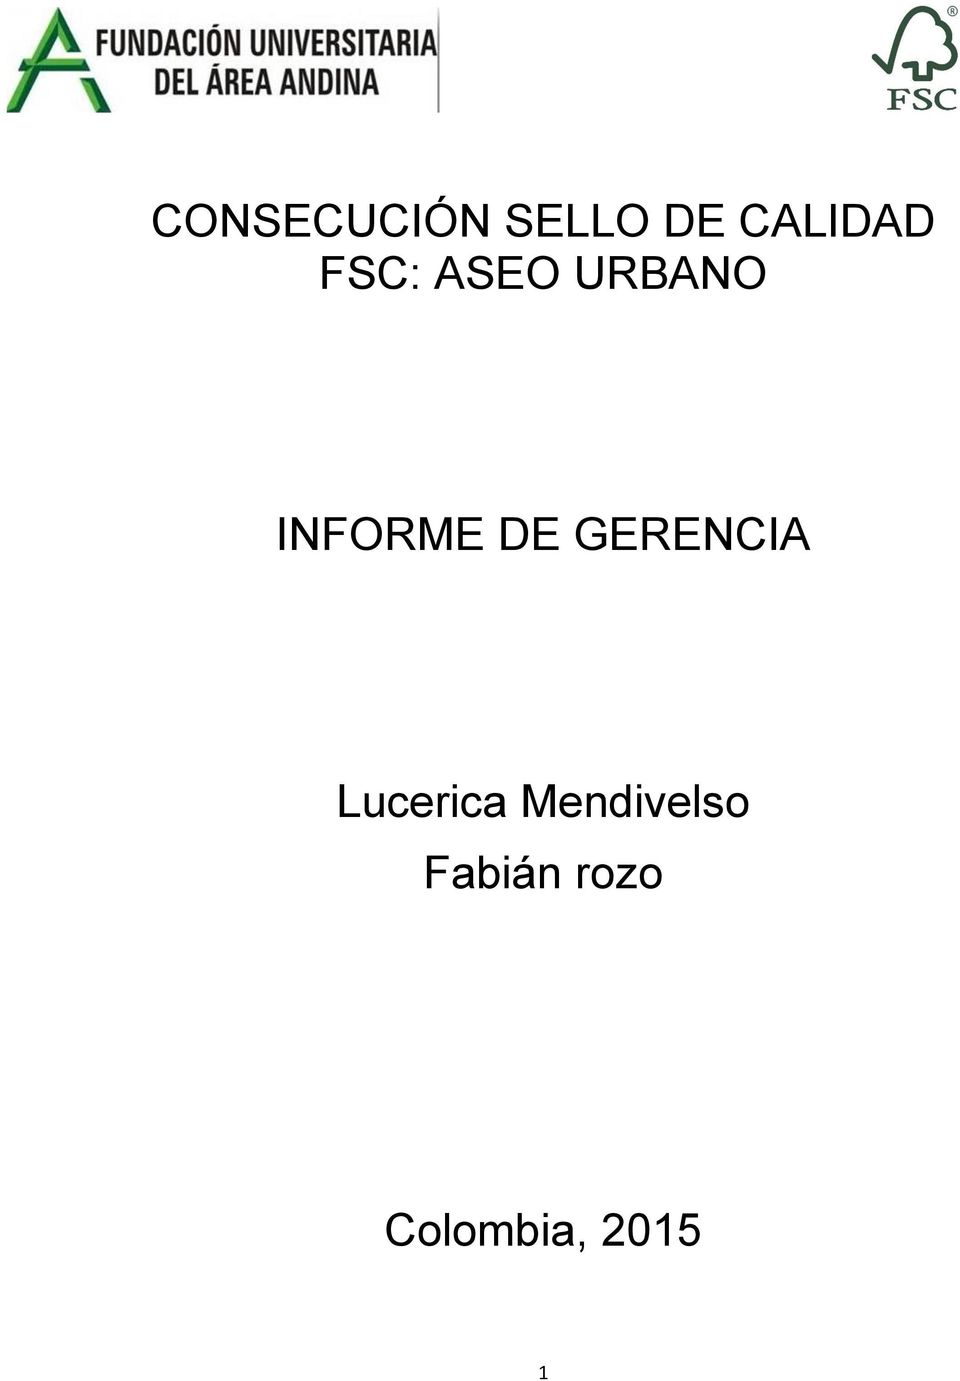 GERENCIA Lucerica Mendivelso